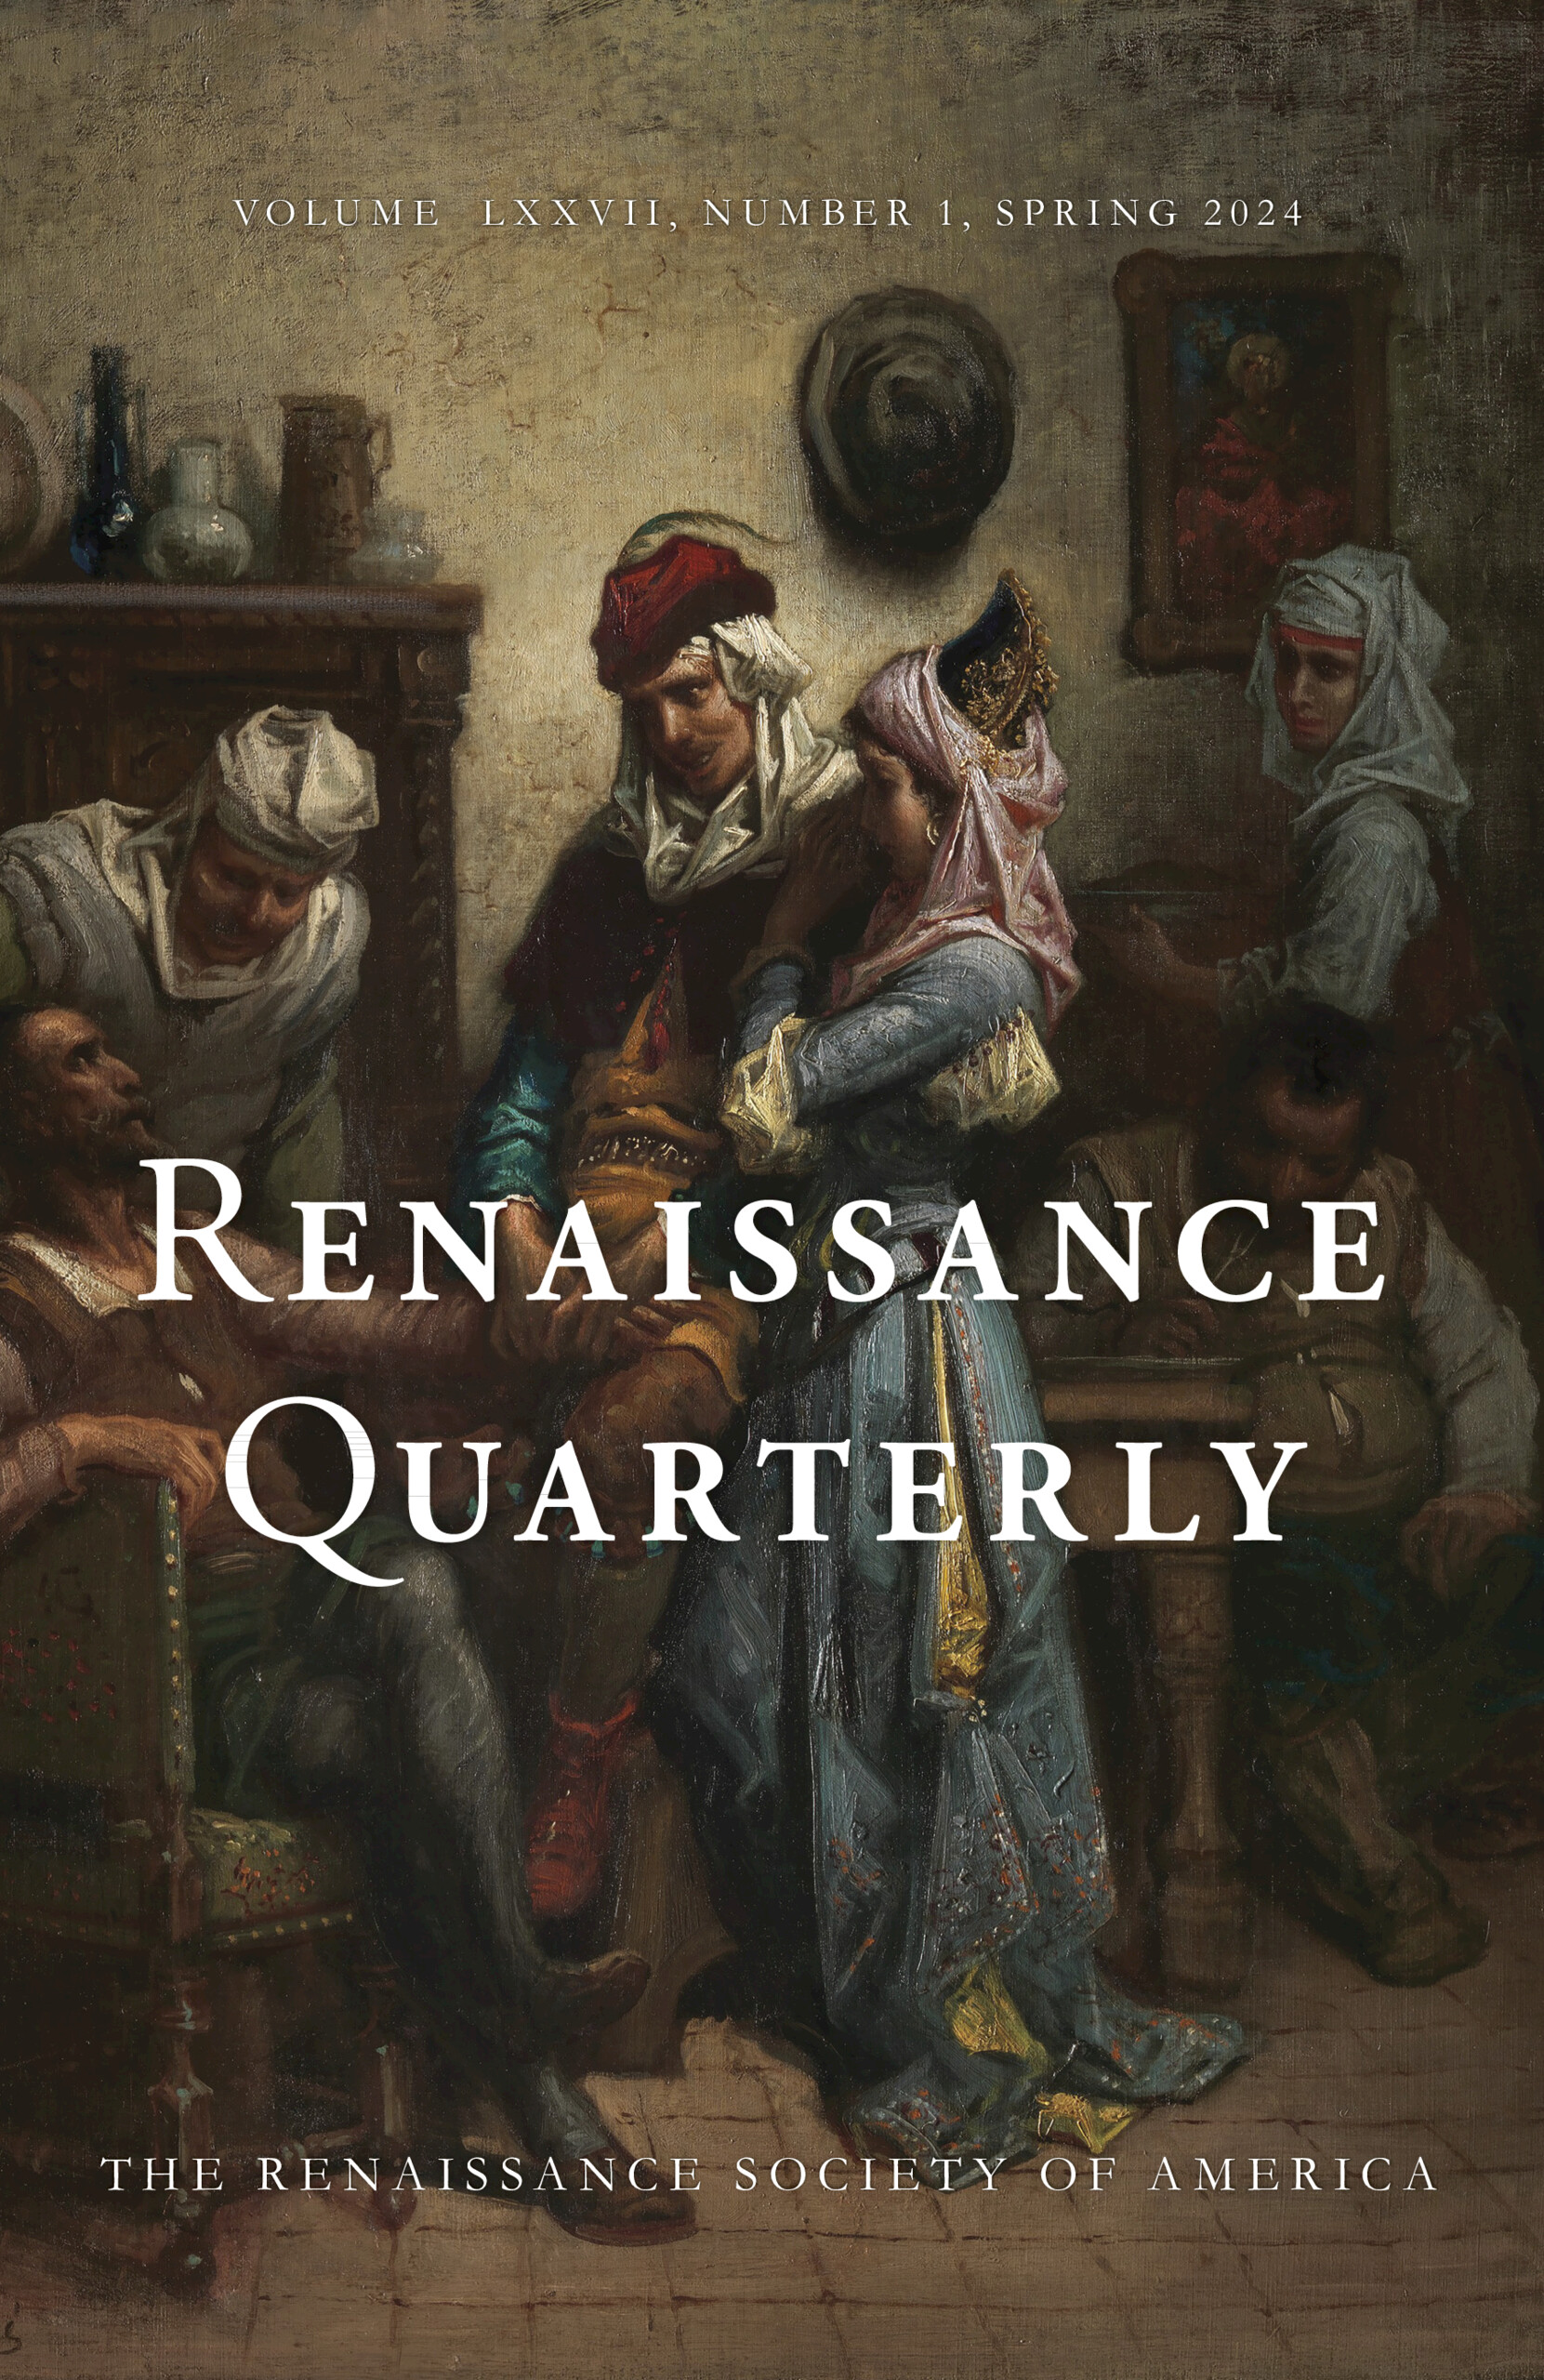 The Italian London of John North: Cultural Contact and Linguistic Encounter  in Early Modern England, Renaissance Quarterly